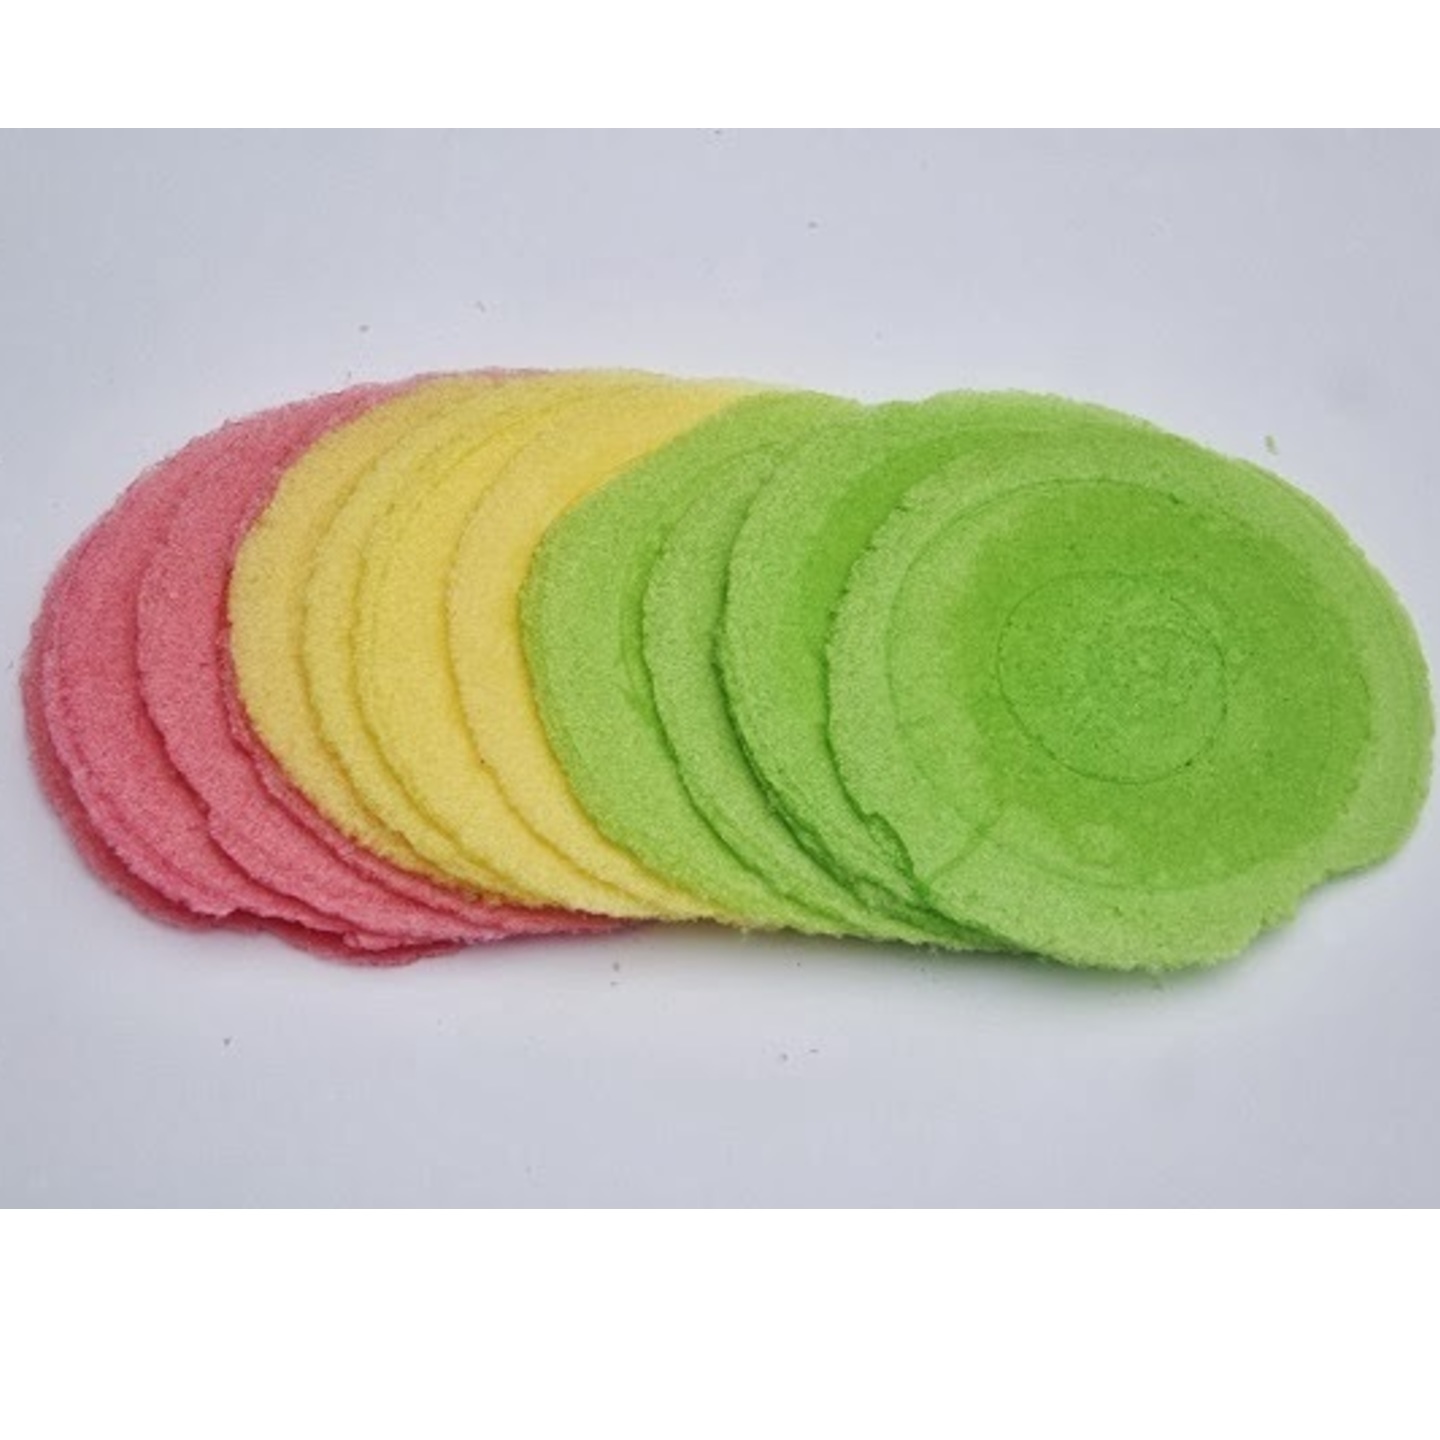 Colourful Wafer Biscuit